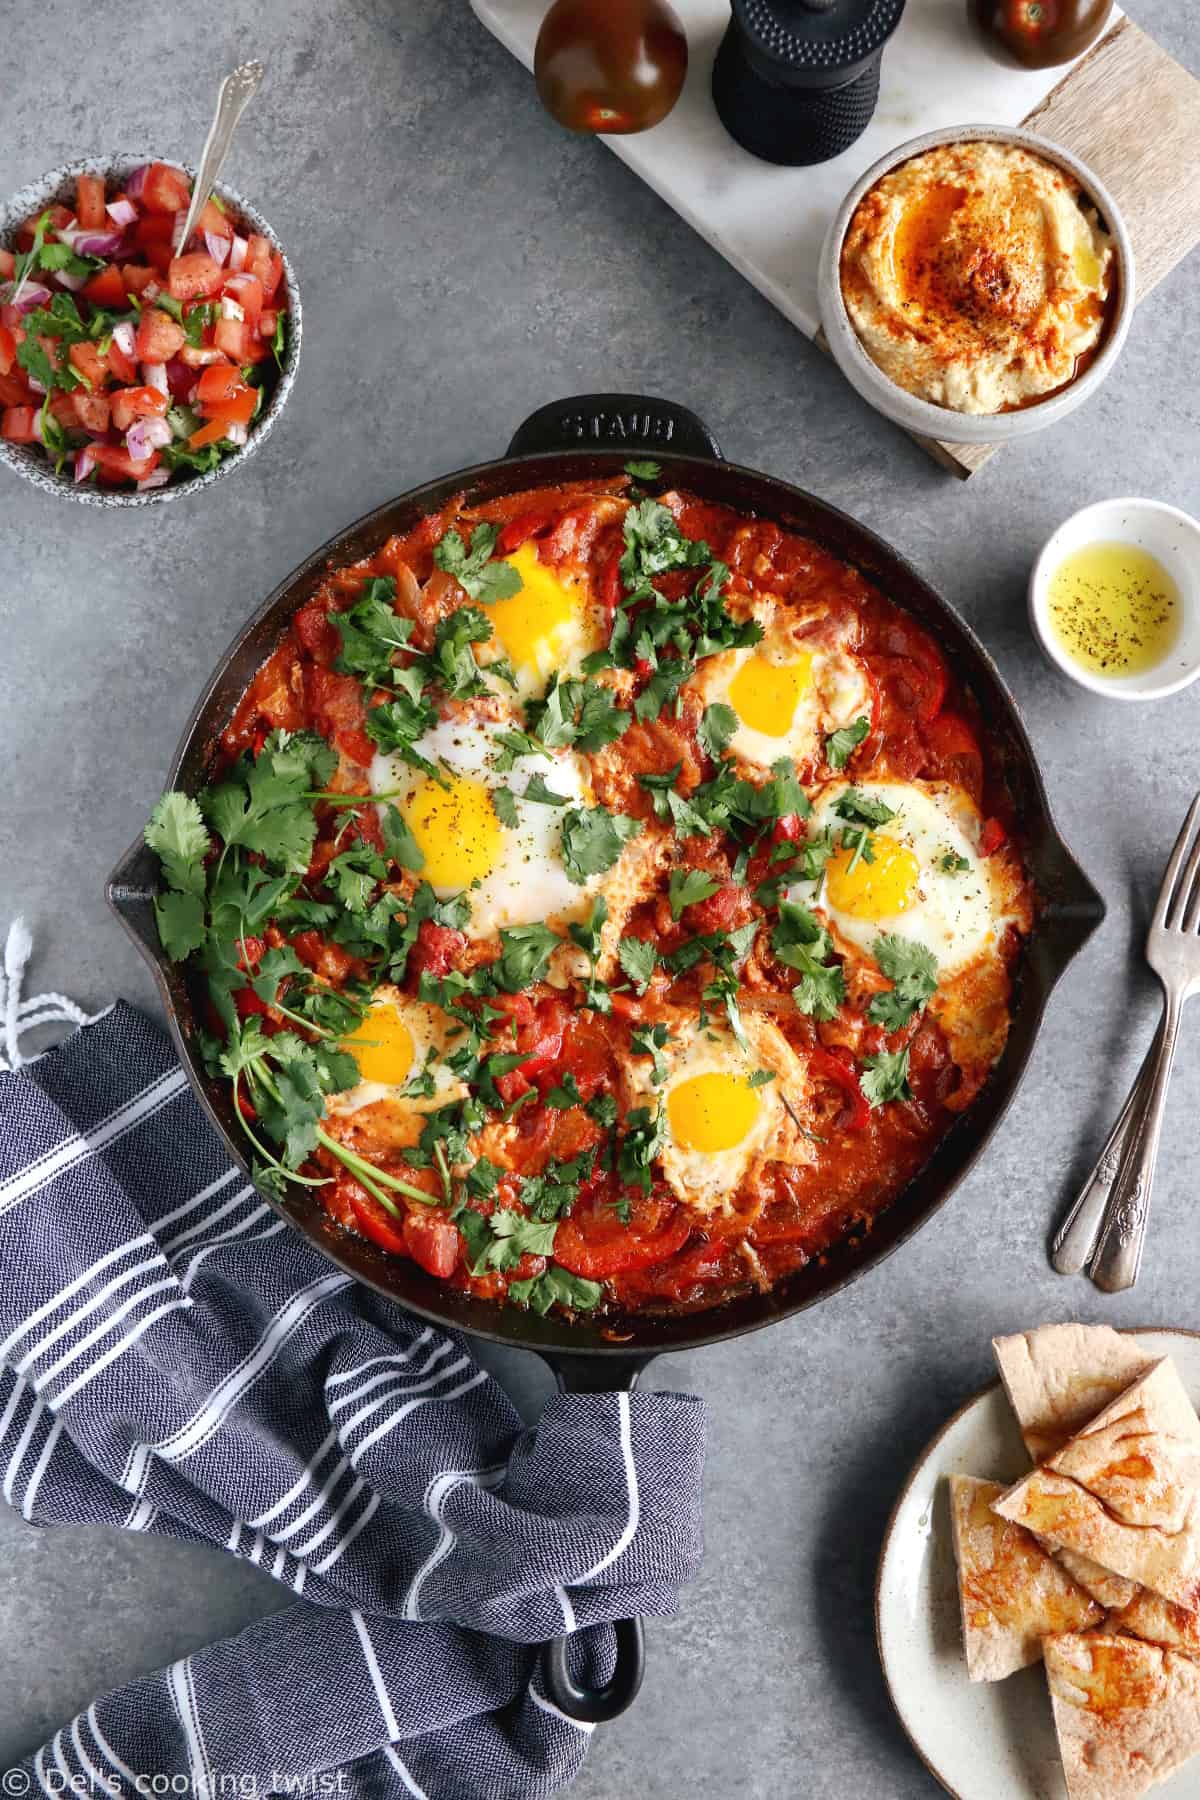 Shakshuka with Feta Cheese is a simple dish consisting of poached eggs in a simmering tomato sauce with feta and spices, traditionally served in a cast iron skillet.